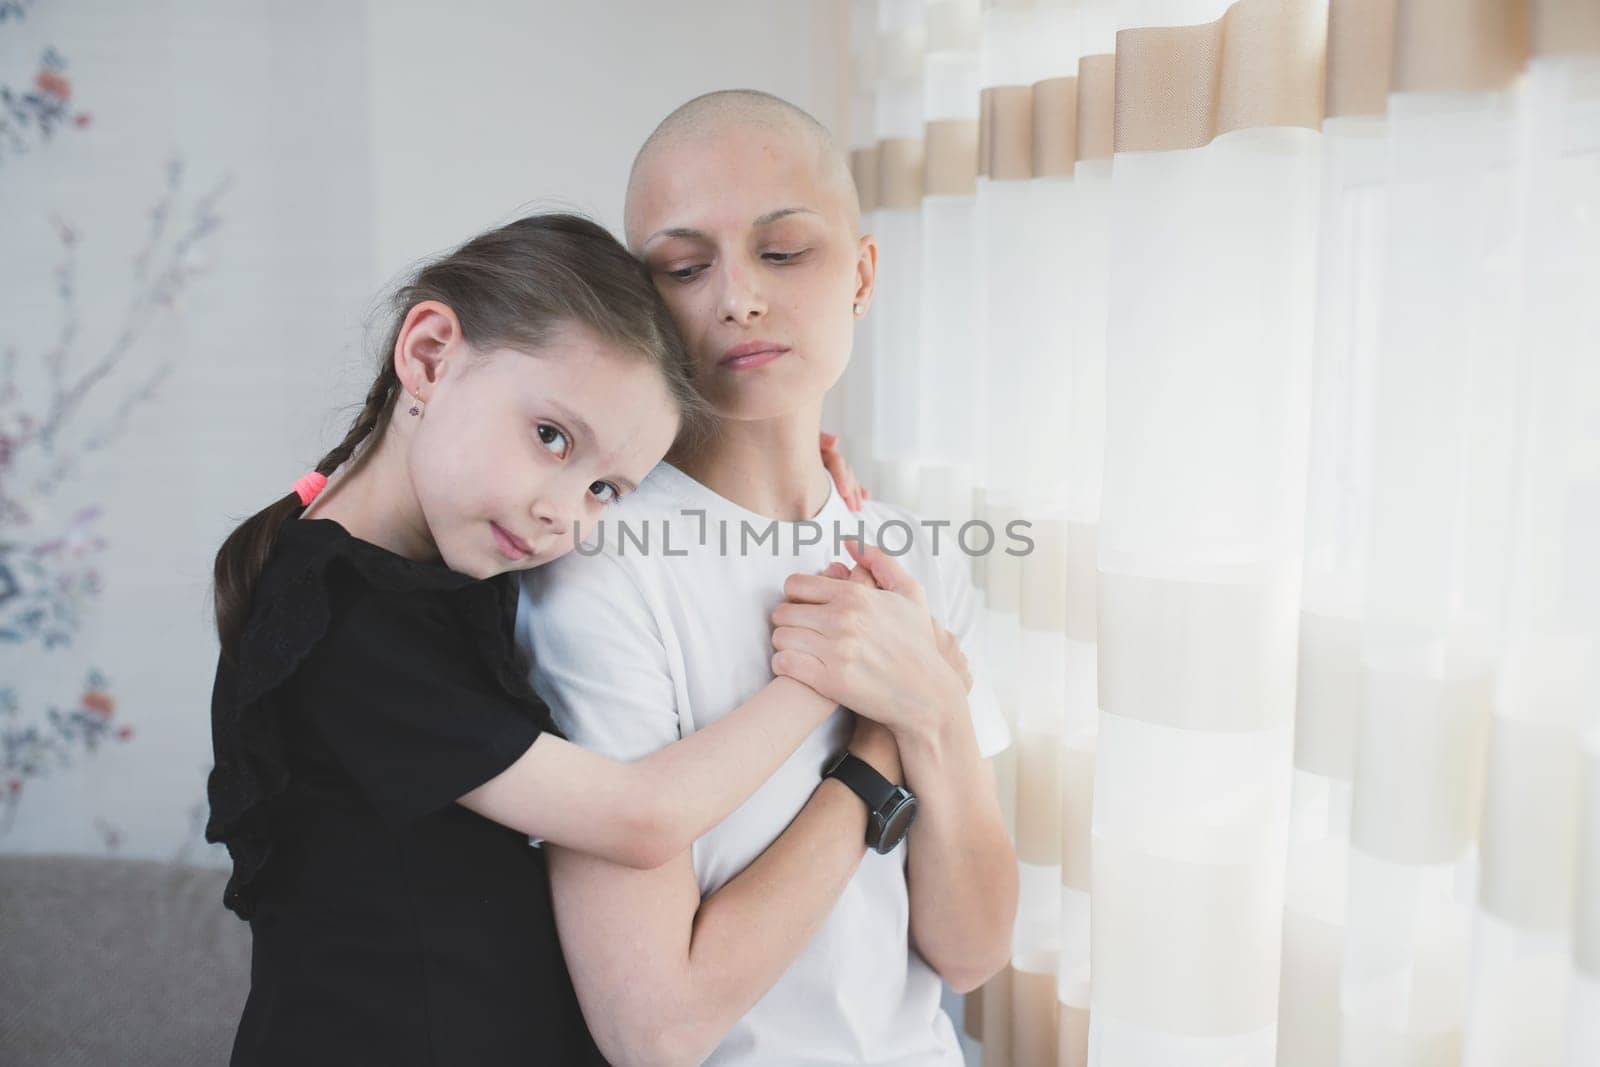 Kid girl hugs her mother with a diagnosis of leukemia near the window. Family support concept.